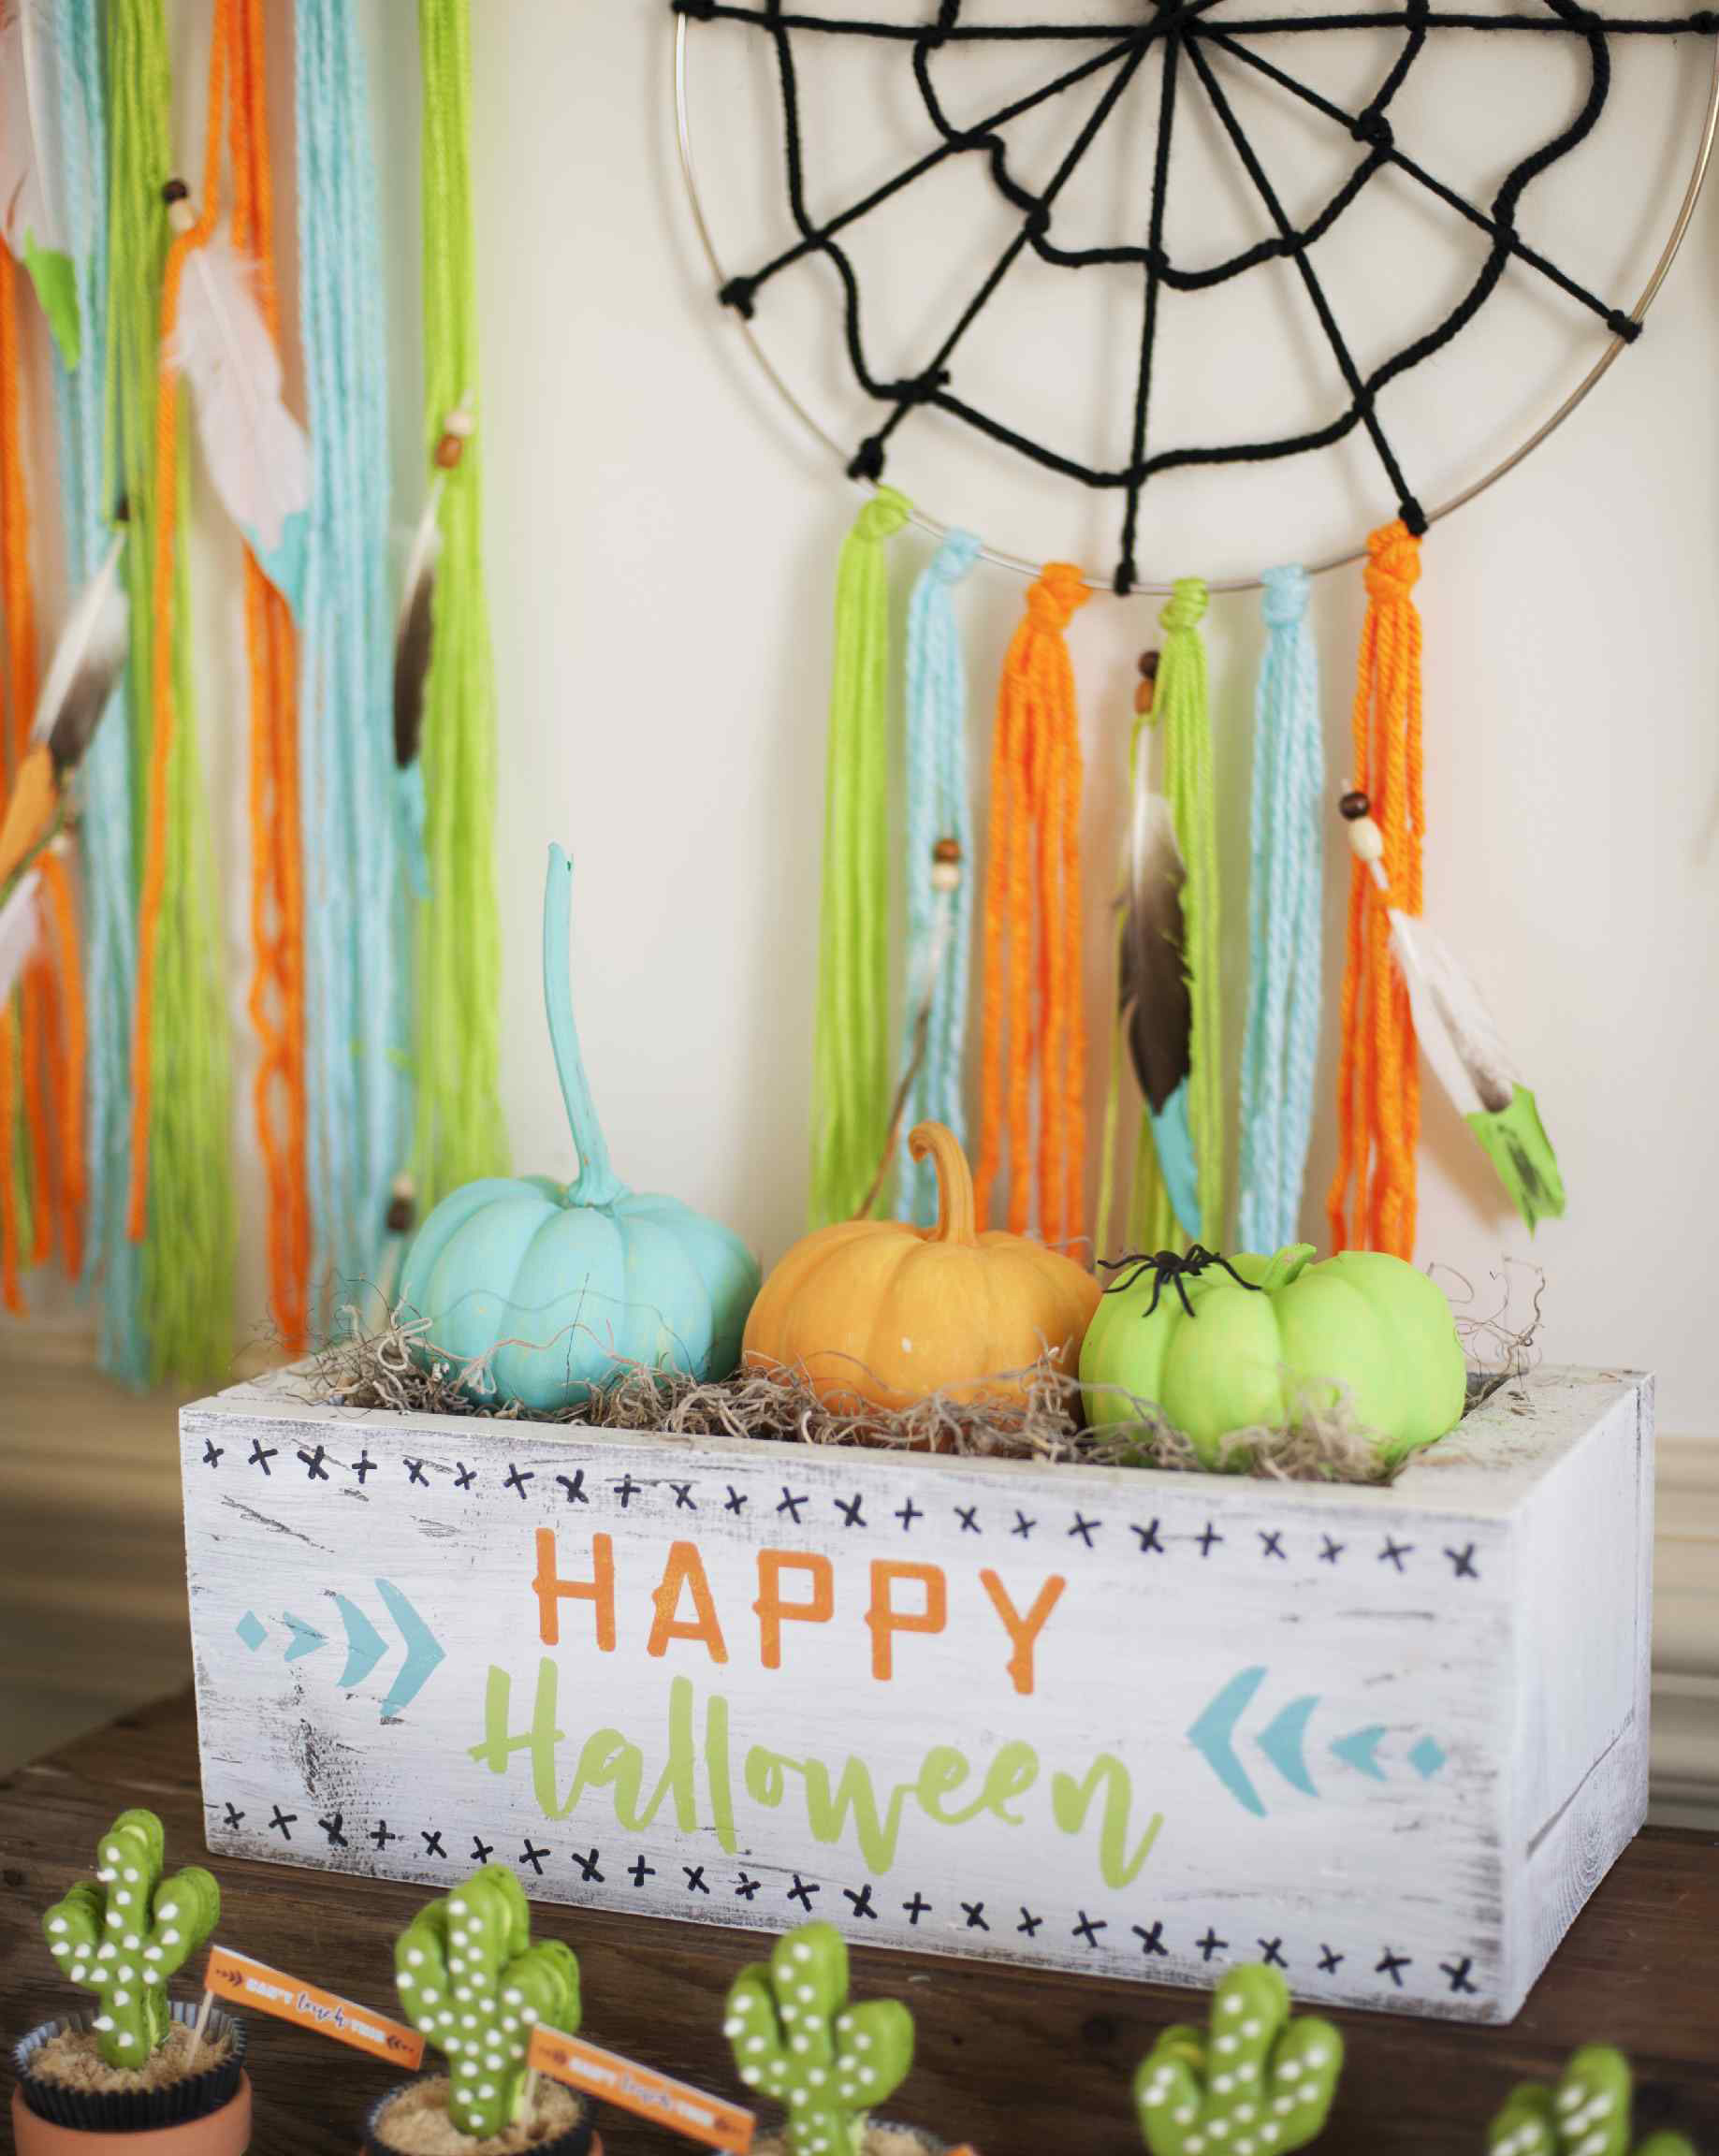 Unique Halloween Party Ideas
 41 Creative Ideas for Halloween Party Themes